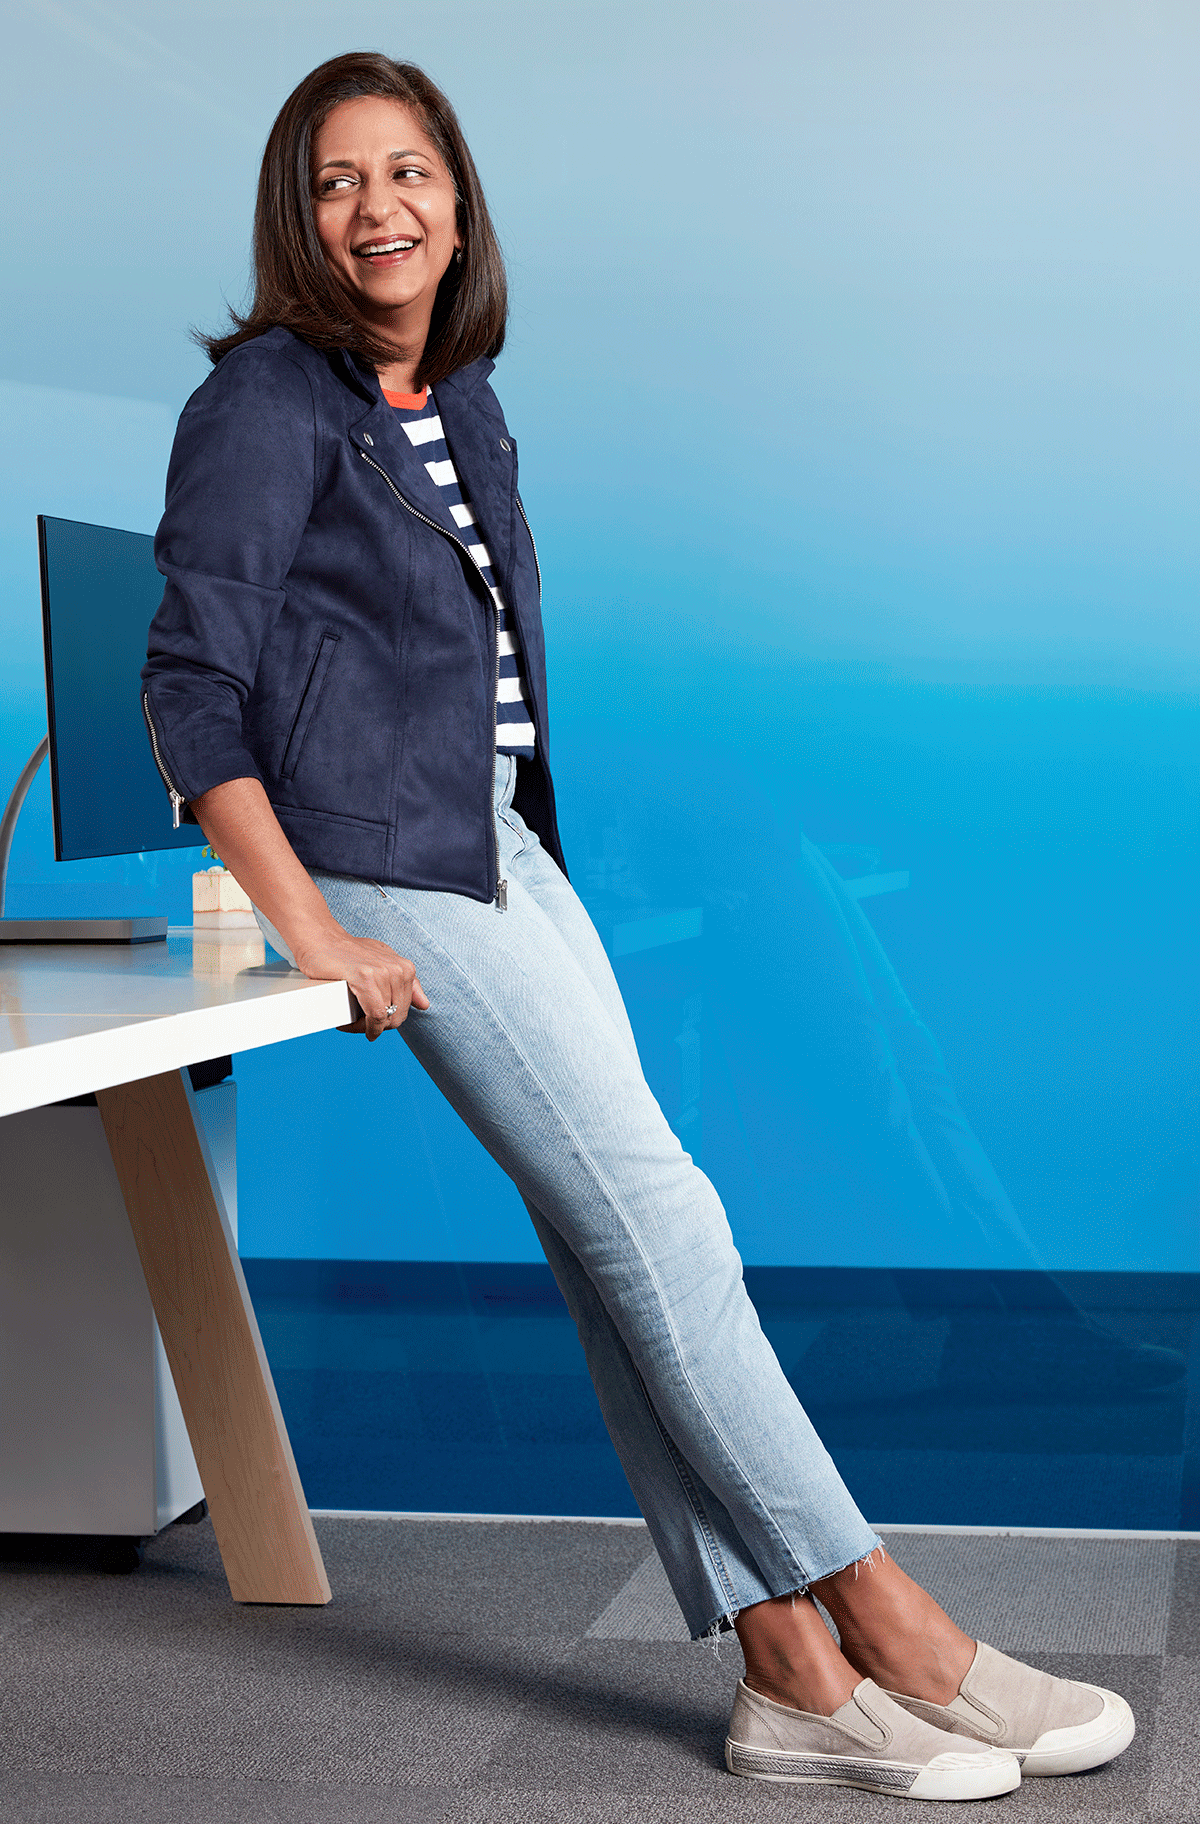 how-to-wear-jeans-at-work-248847-1519151755852-main